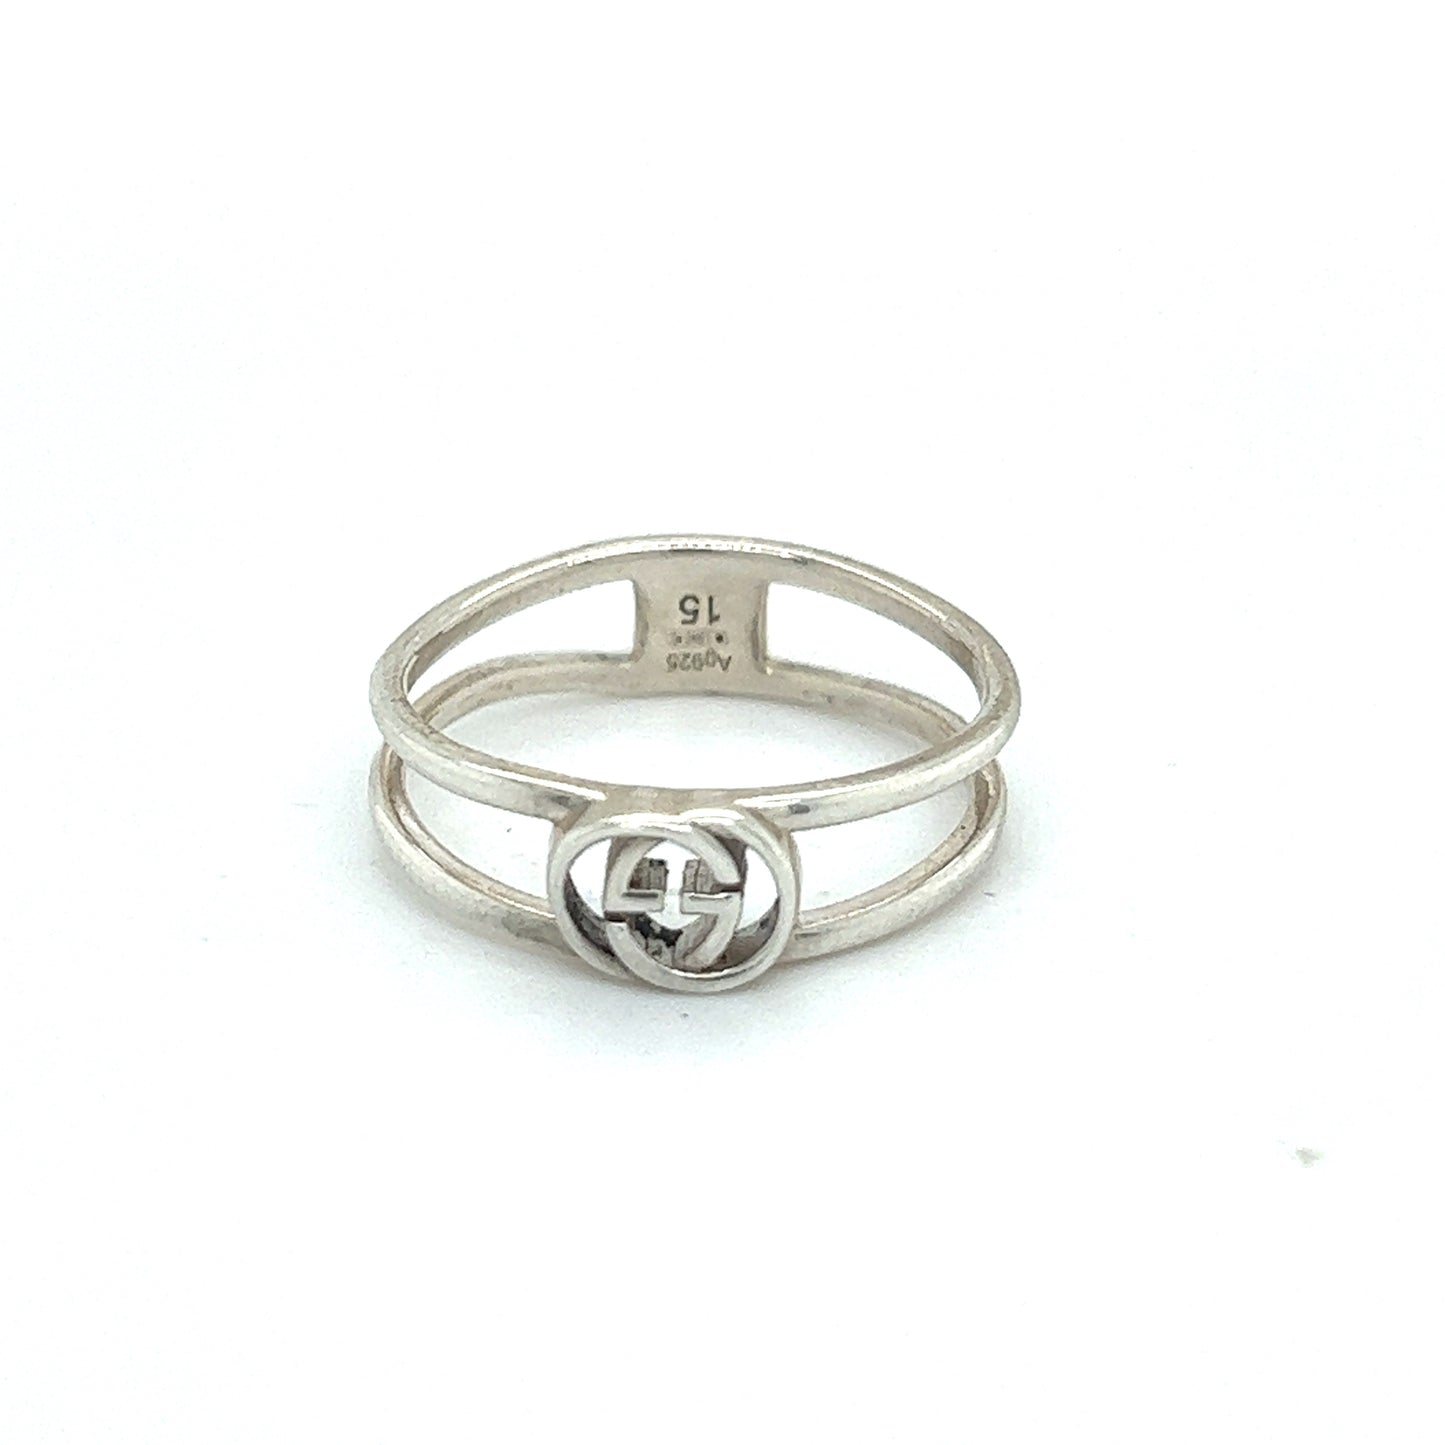 Gucci Estate Ladies Ring Size 7 Sterling Silver G16